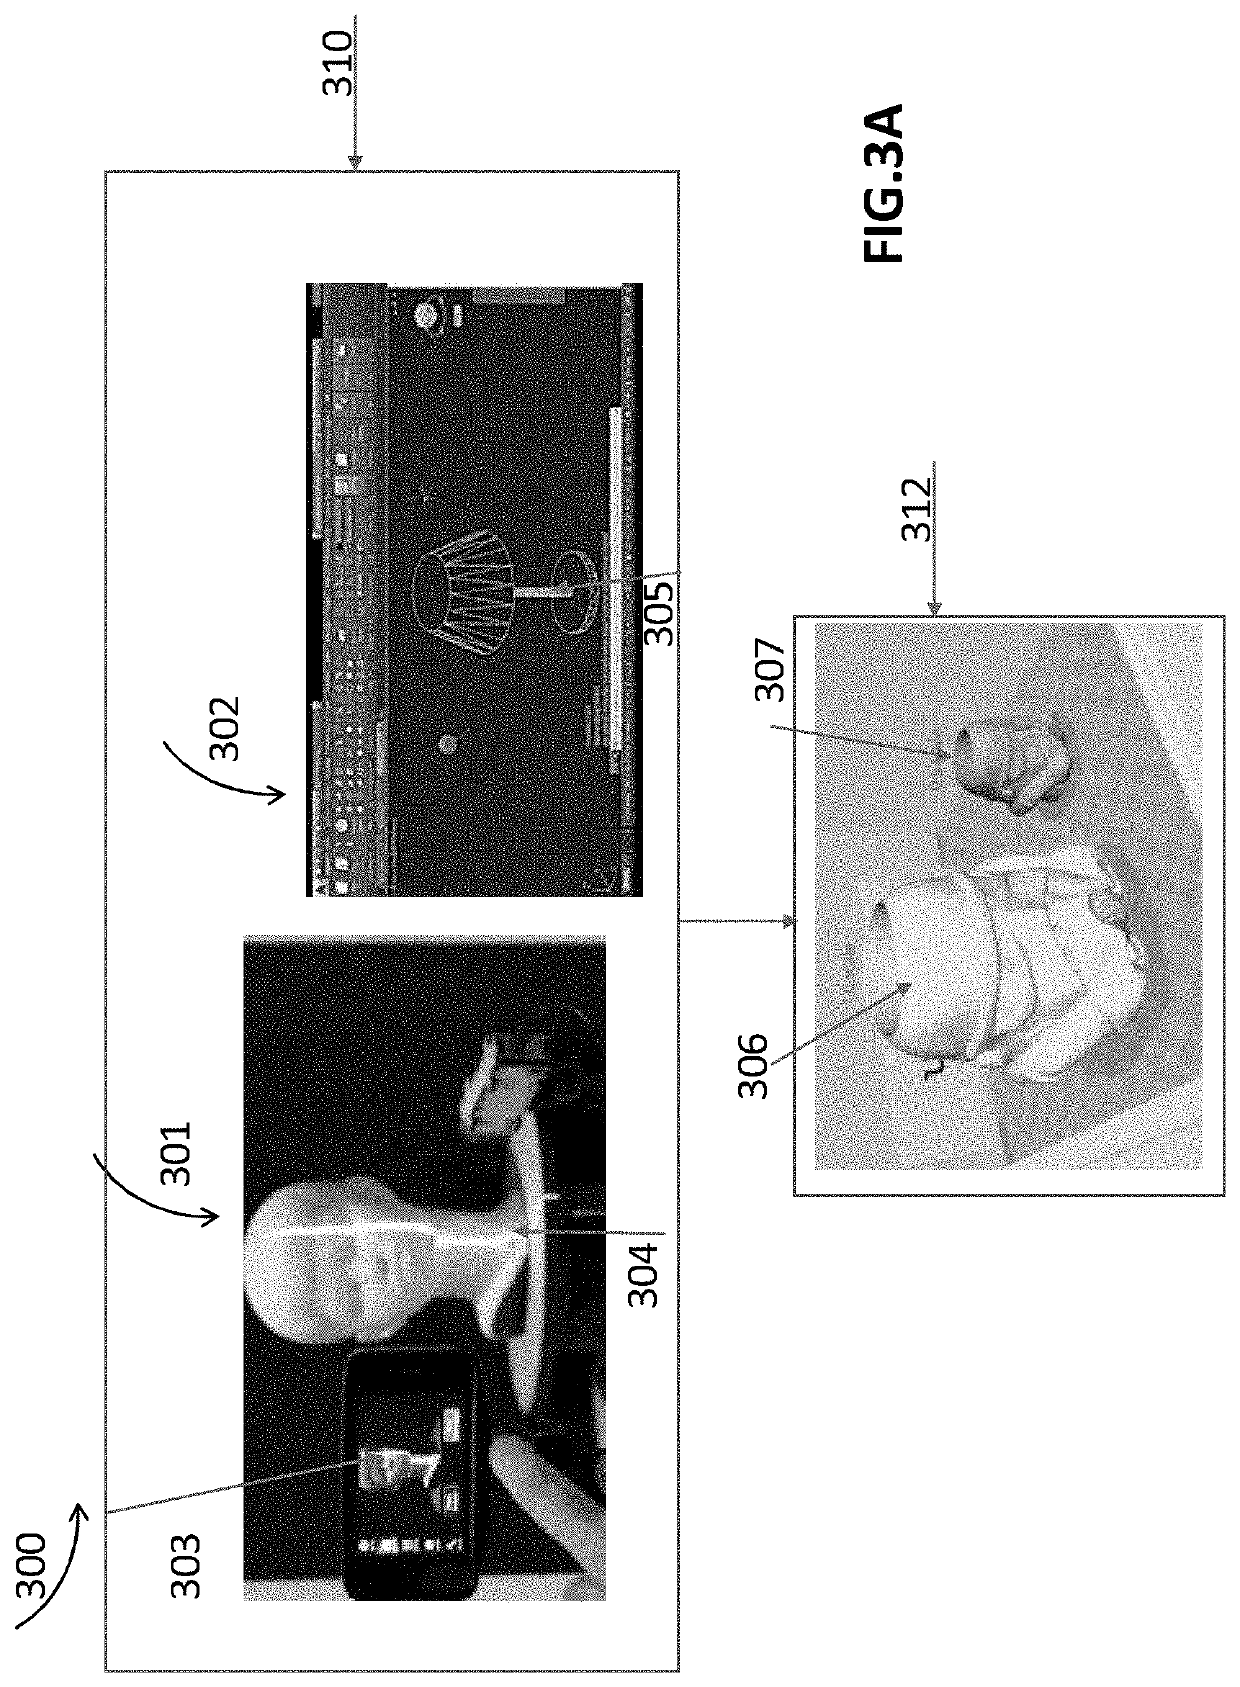 Method and System for the 3D Design and Calibration of 2D Substrates